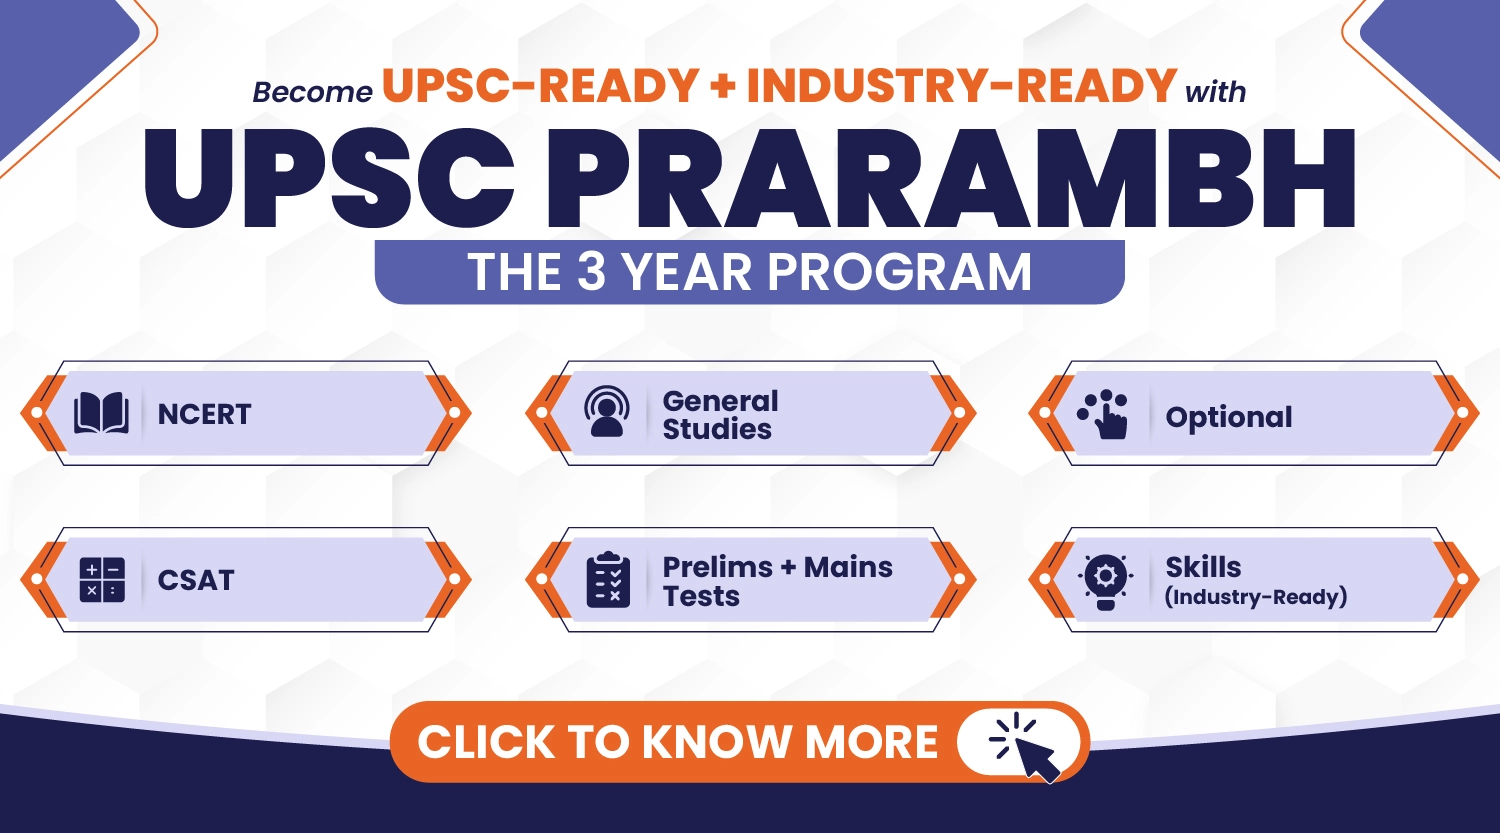 how to improve essay writing skills for upsc